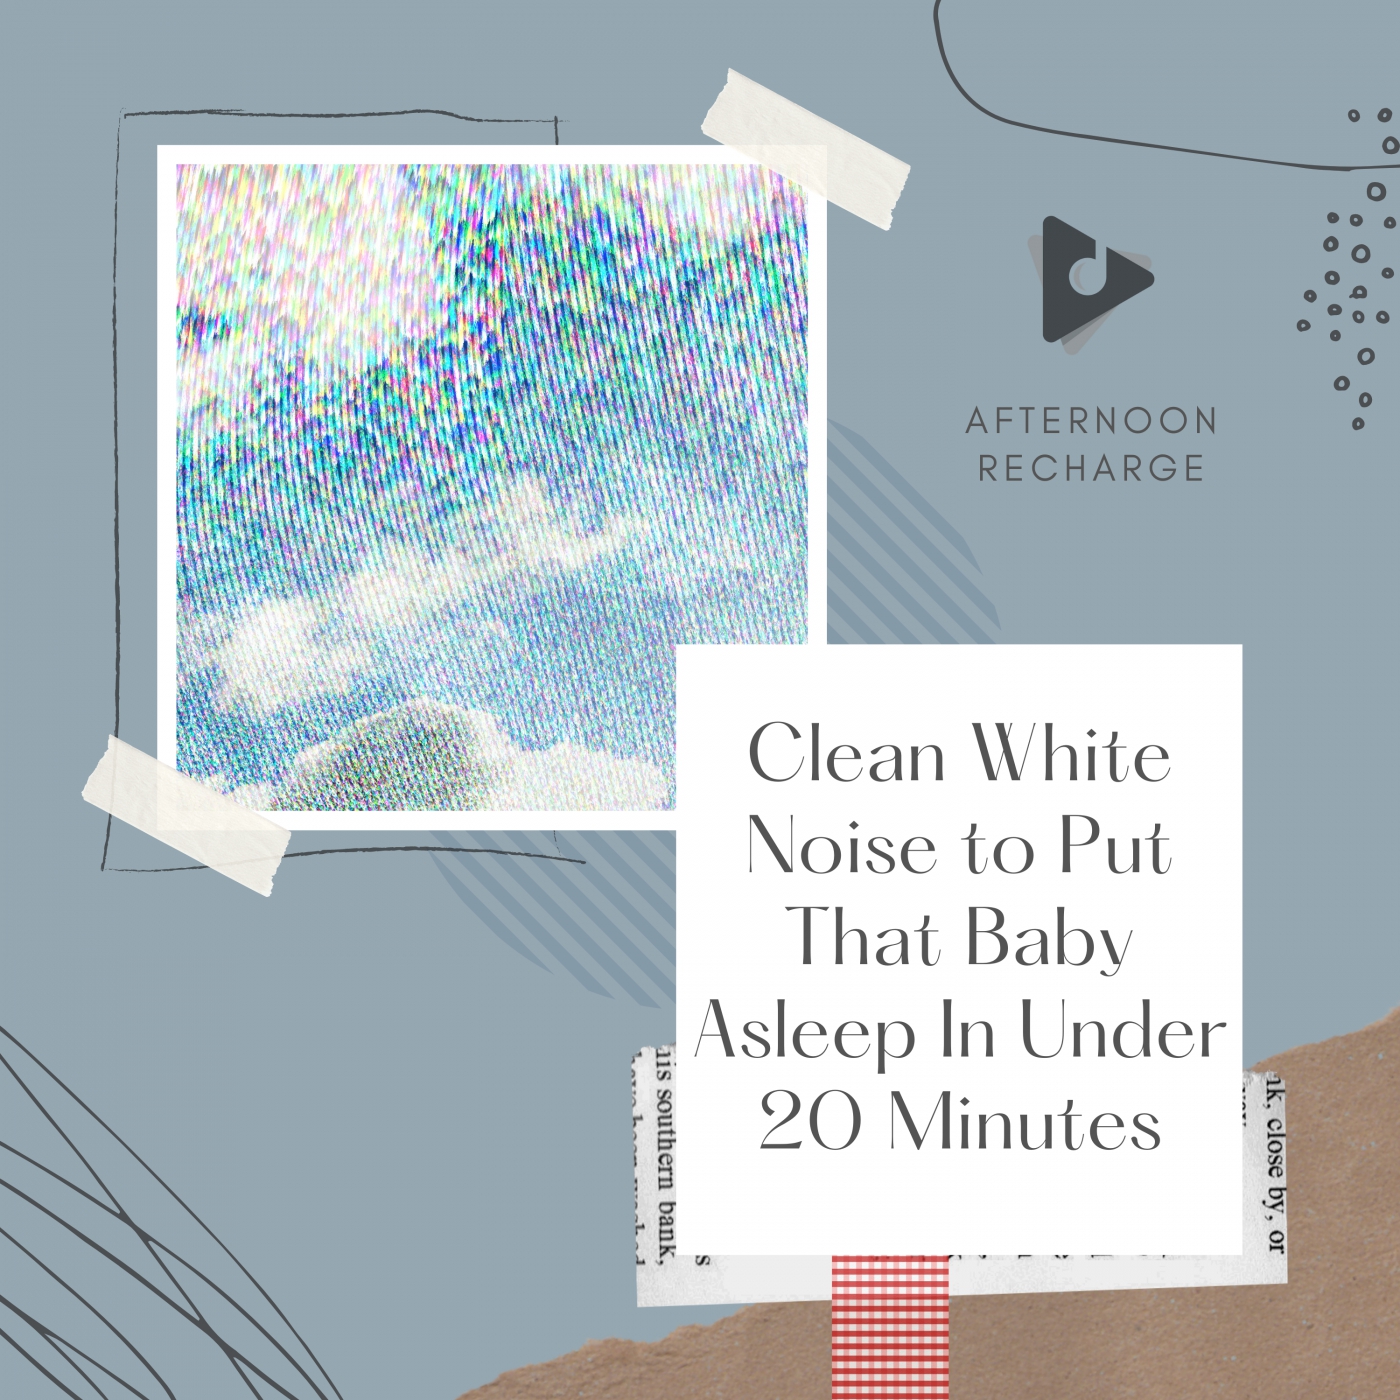 Clean White Noise to Put That Baby Asleep In Under 20 Minutes